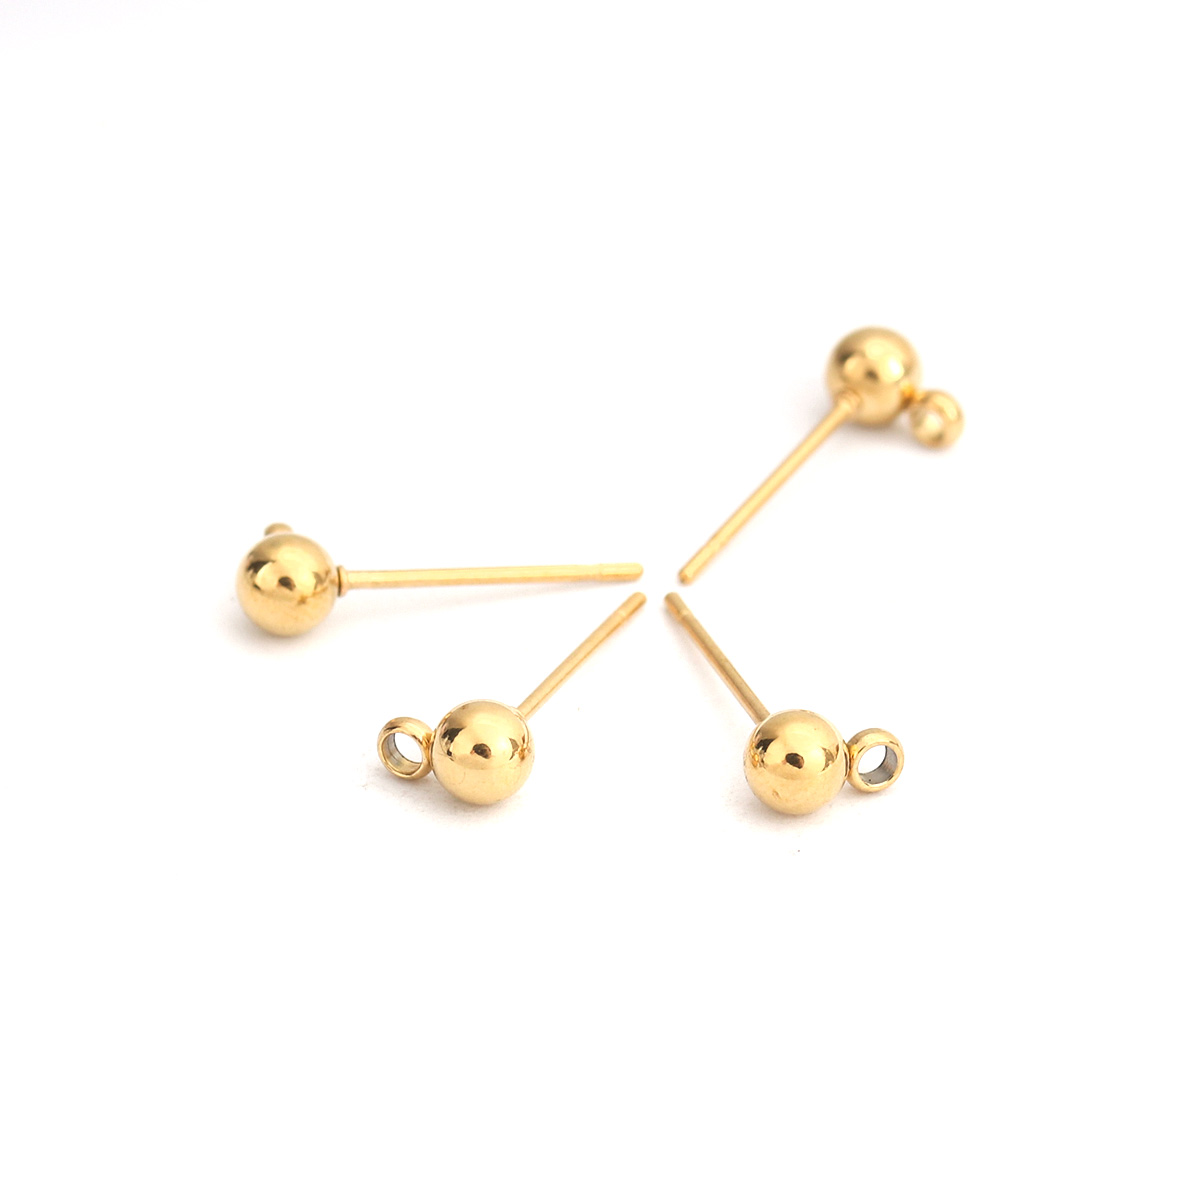 Picture of Stainless Steel Ear Post Stud Earrings Round Gold Plated W/ Loop 6mm x 4mm, Post/ Wire Size: (21 gauge), 10 PCs